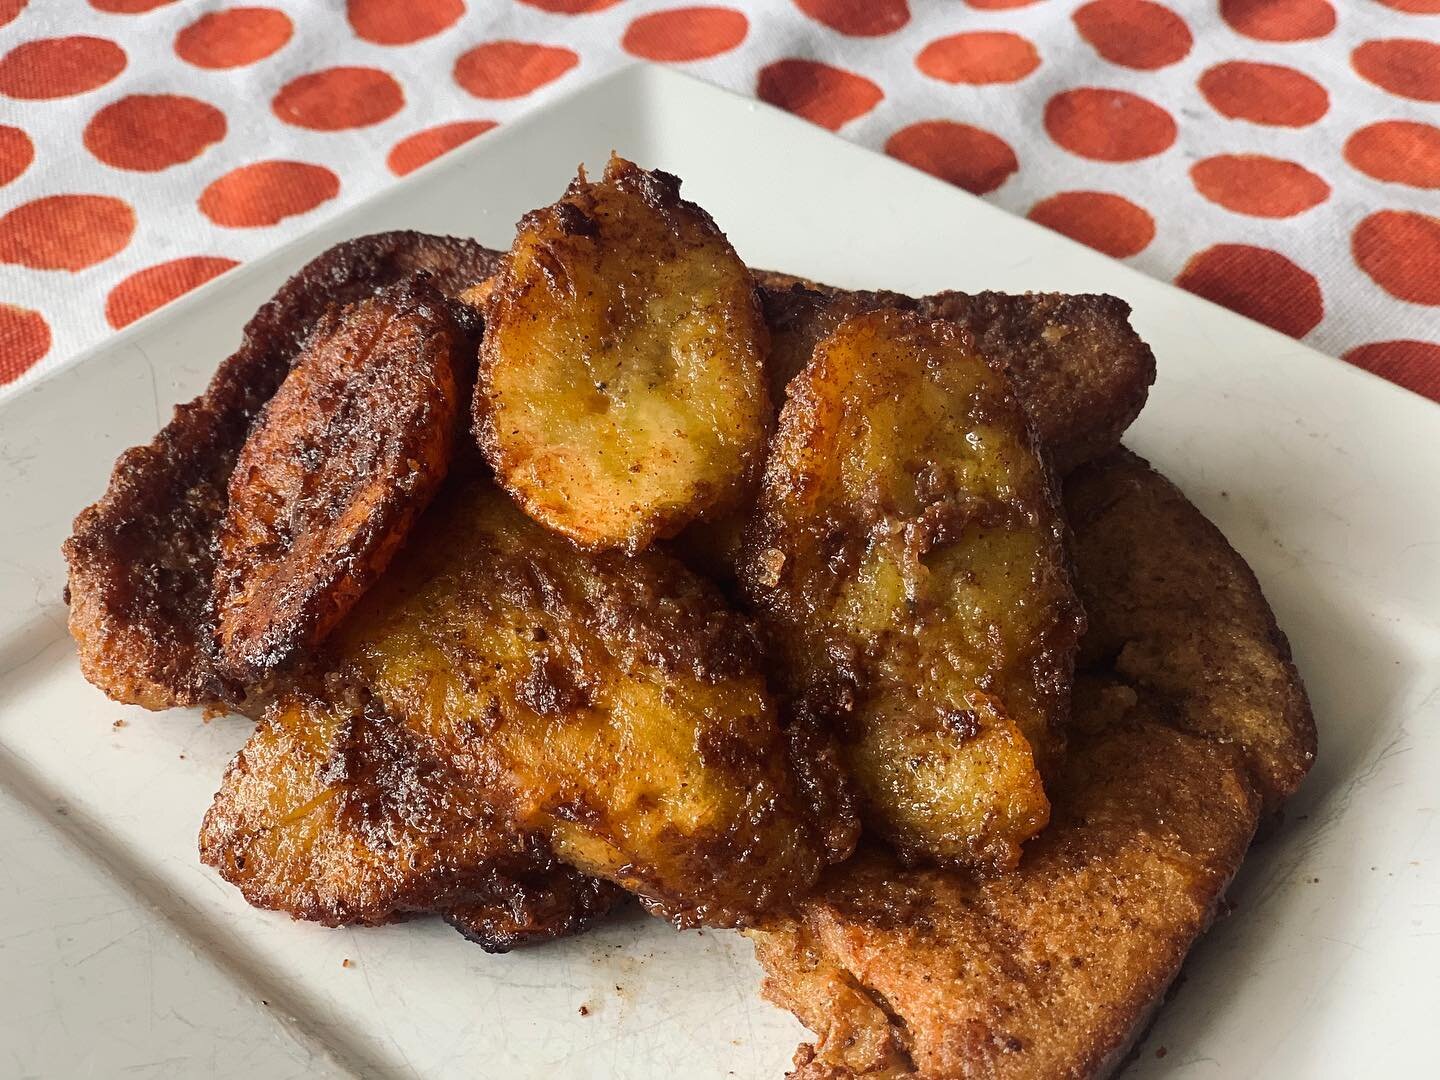 Plantain topped French Toast is our favorite way to start our sweet Saturdays. Text us at (323) 300-4054 to secure your plate 📲

🇯🇲✨🇯🇲✨🇯🇲✨🇯🇲✨🇯🇲✨🇯🇲✨
*
*
*
*
*
*

#privatedinners #anjahles #fullflavoredjoy #catering #lacatering #plantbased